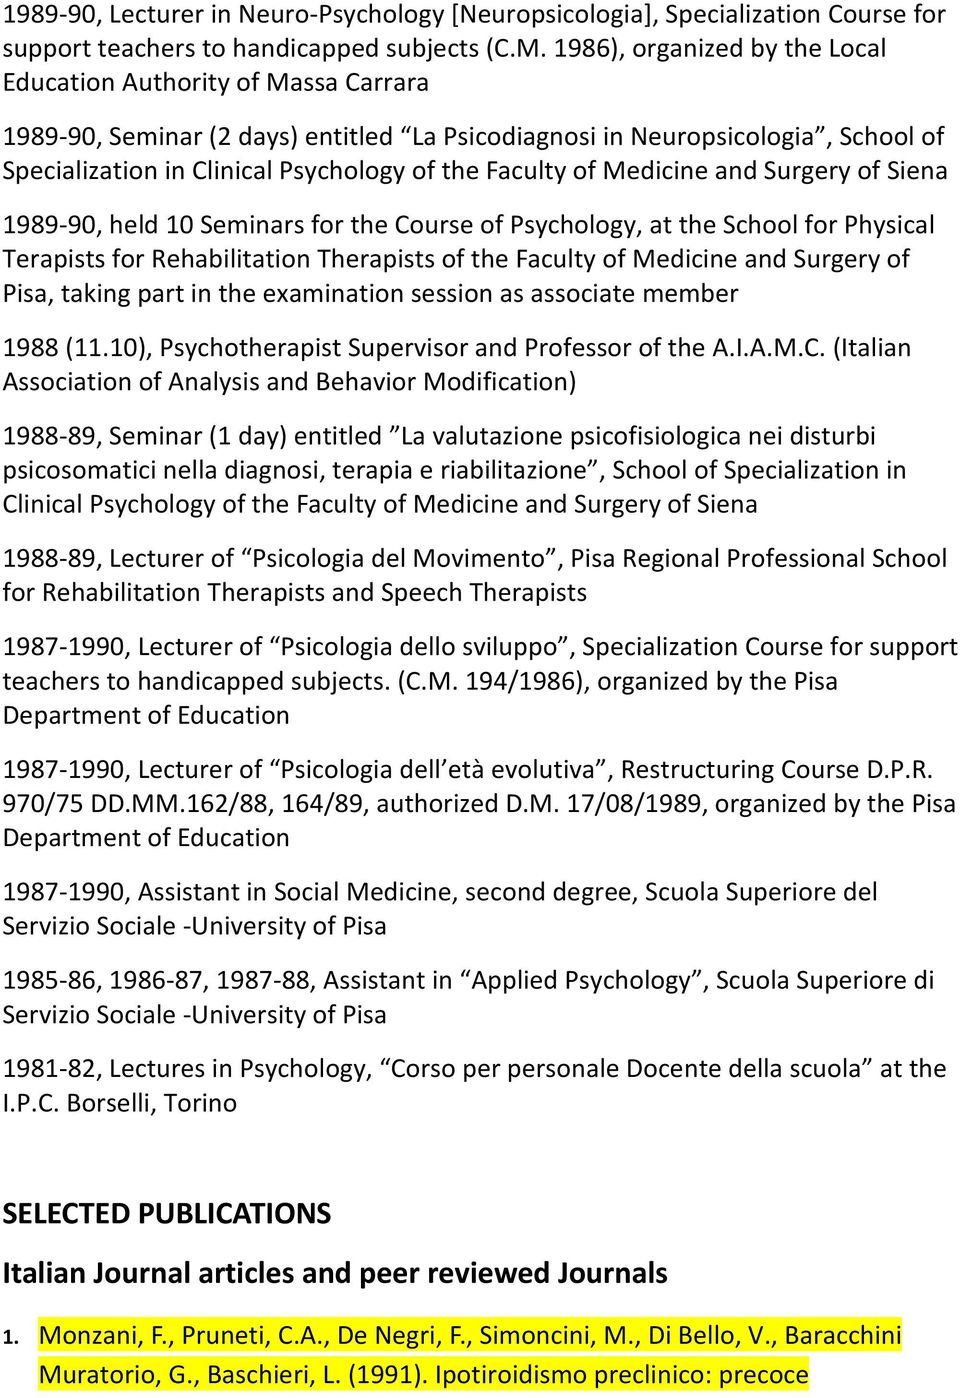 Faculty of Medicine and Surgery of Siena 1989-90, held 10 Seminars for the Course of Psychology, at the School for Physical Terapists for Rehabilitation Therapists of the Faculty of Medicine and